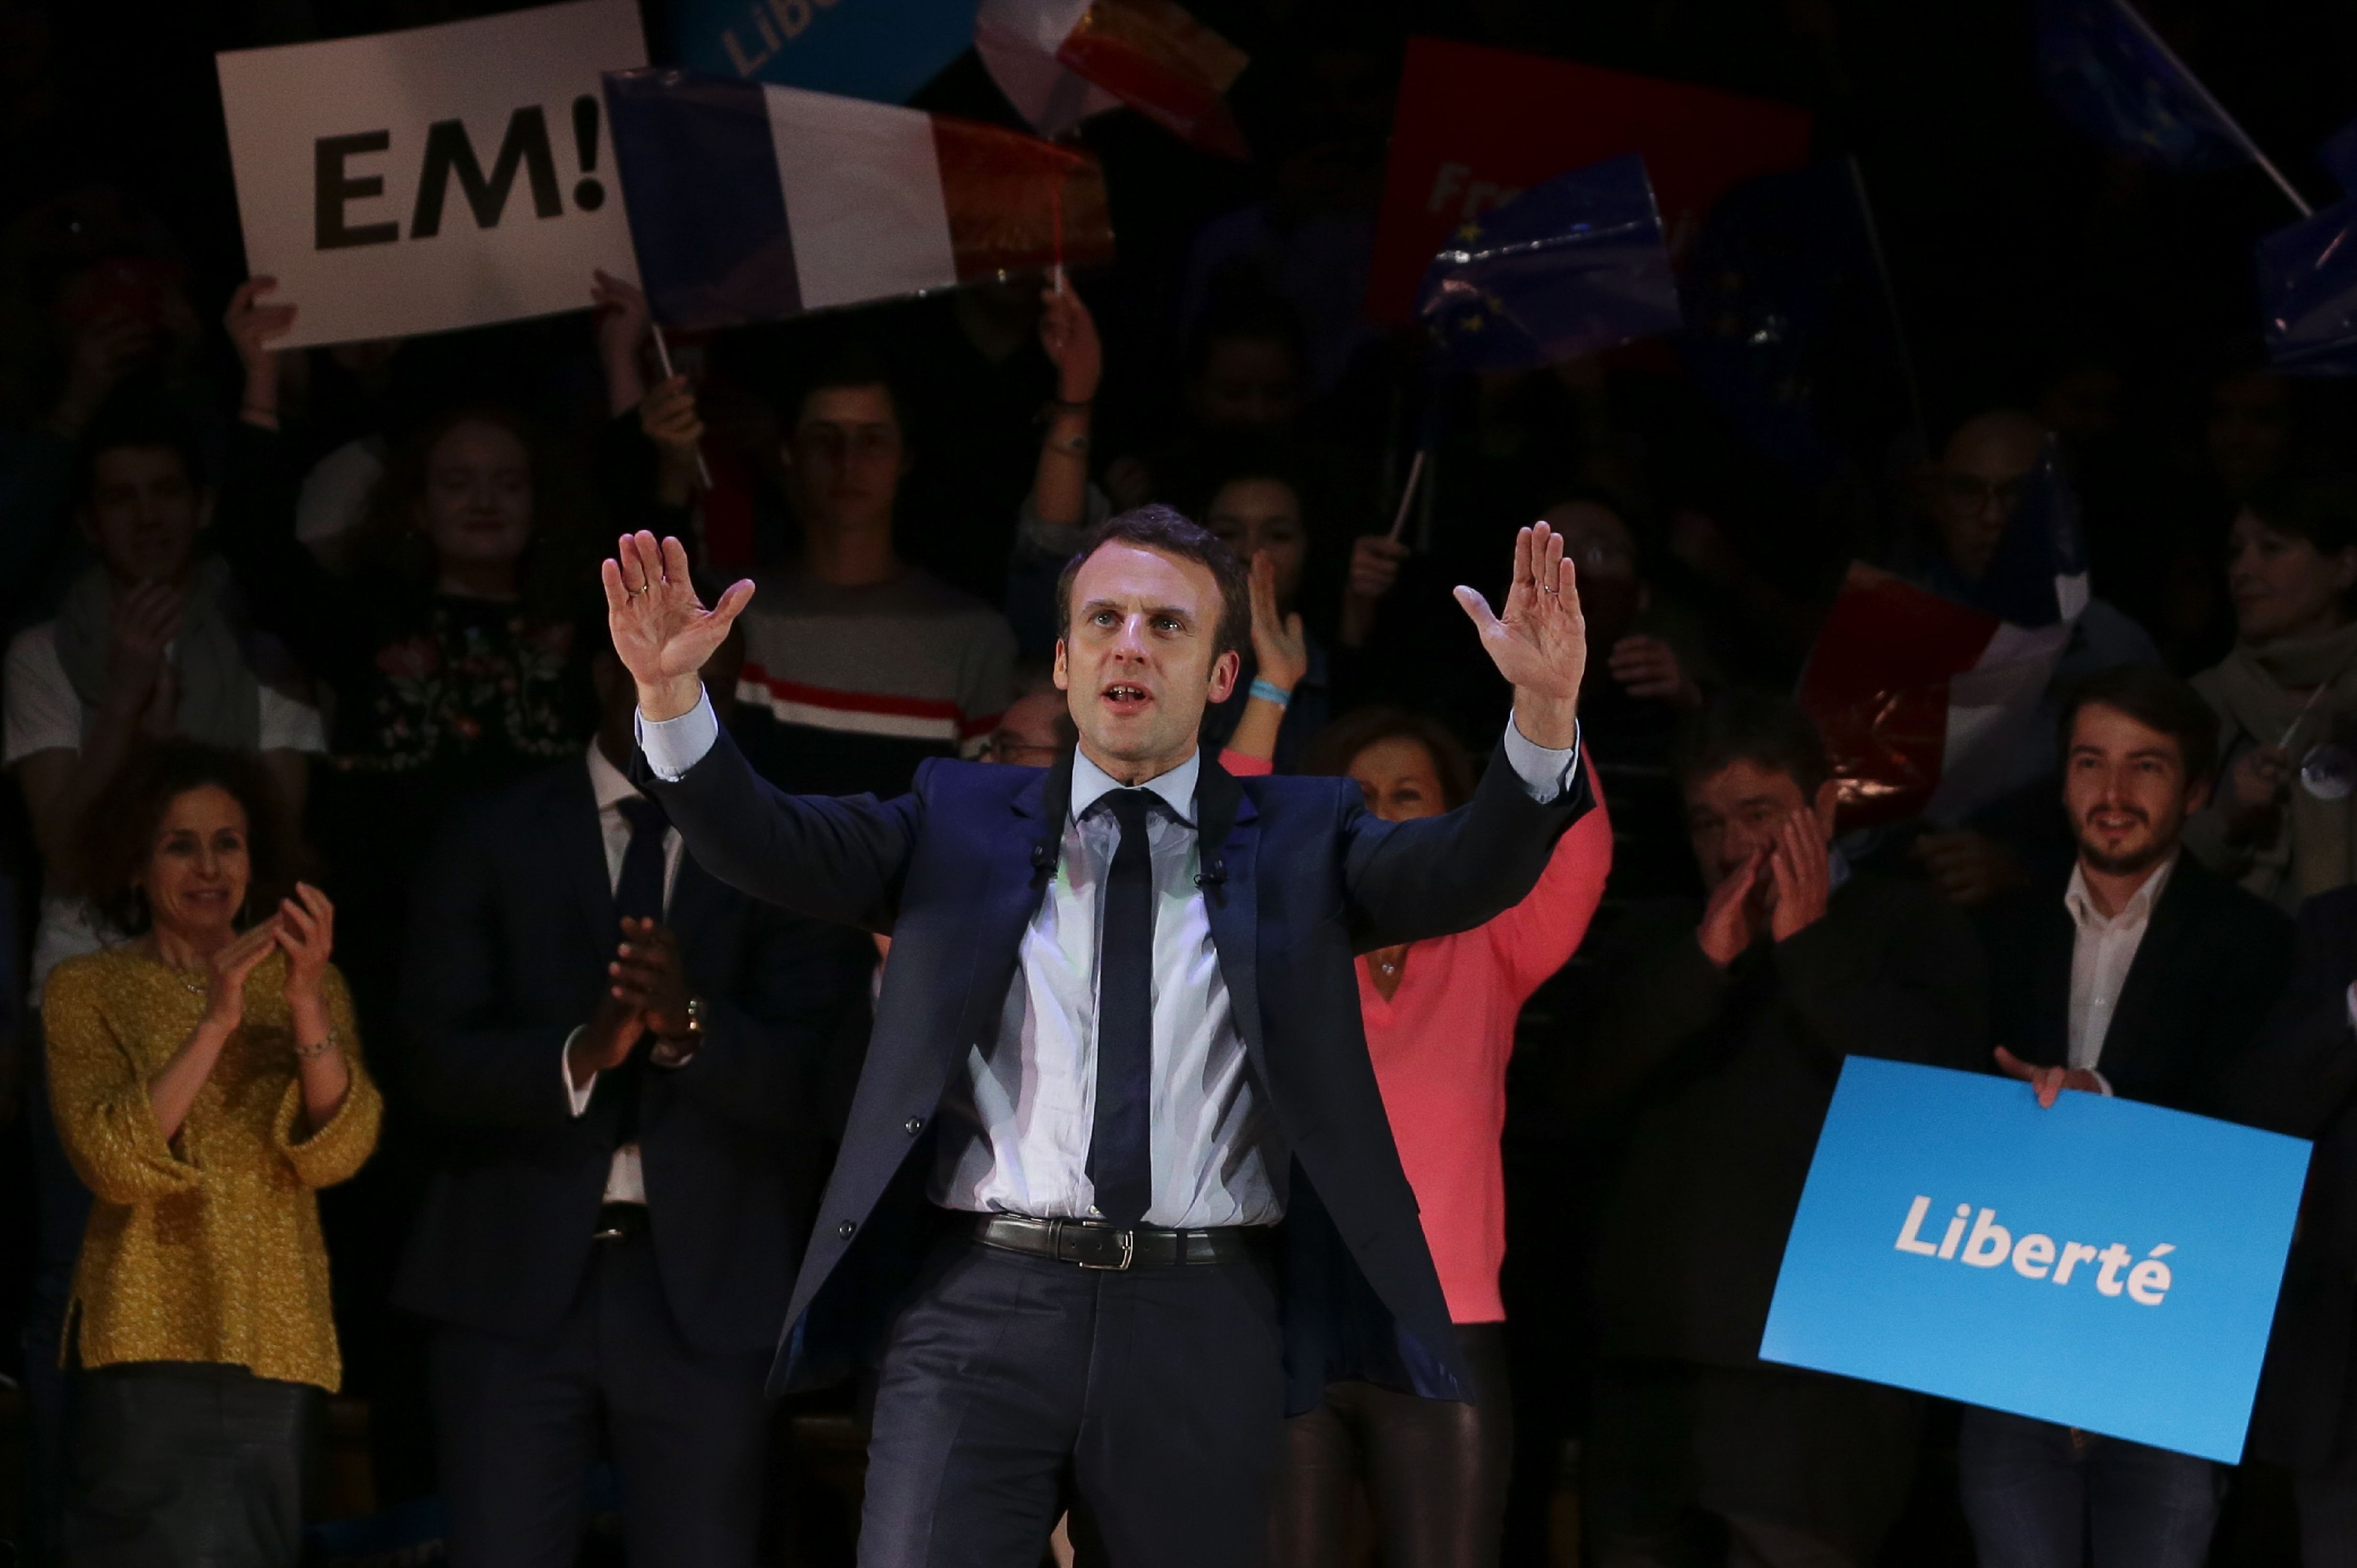 French presidential election candidate  Emmanuel Macron speaks on stage at a campaign event in central London on Feb. 21, 2017. (Daniel Leal-Olivas—AFP/Getty Images)